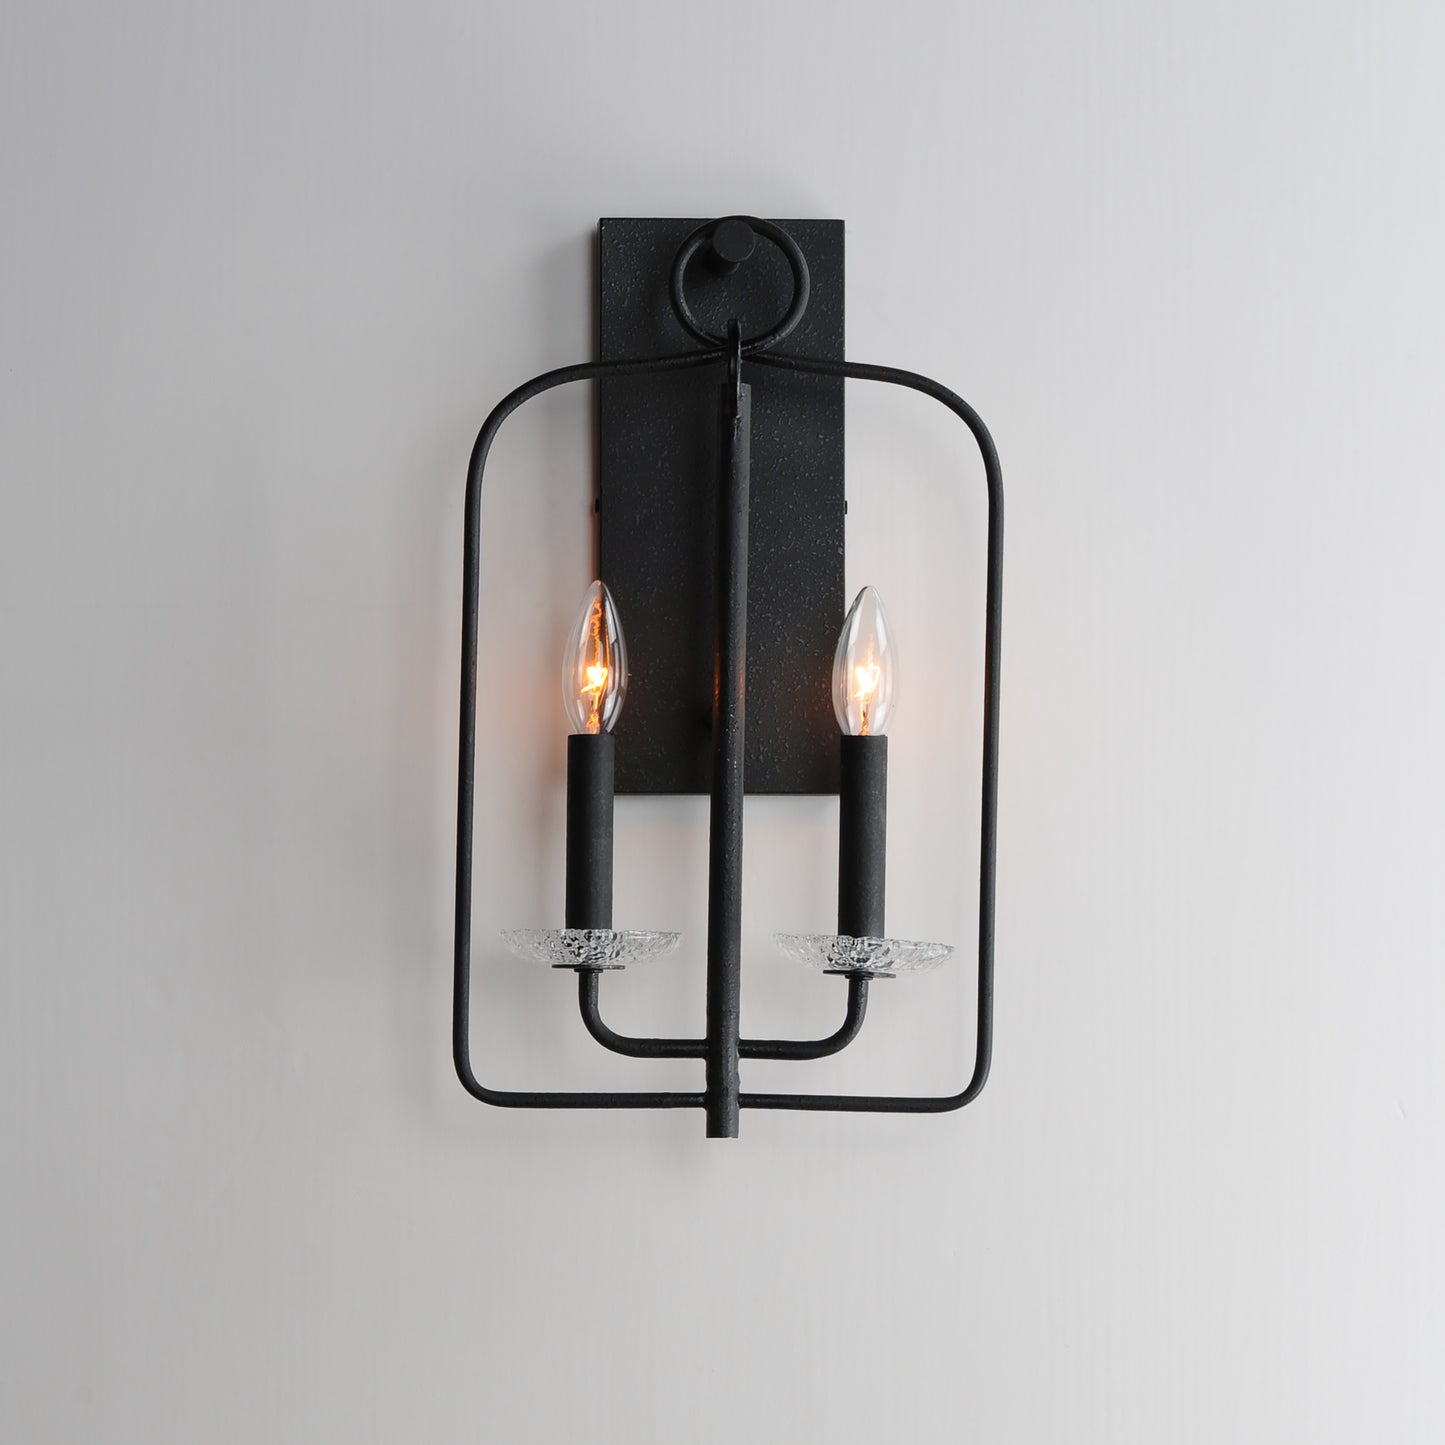 12322TCAR - 2 Light Madeira 0" Wall Sconce - Anthracite